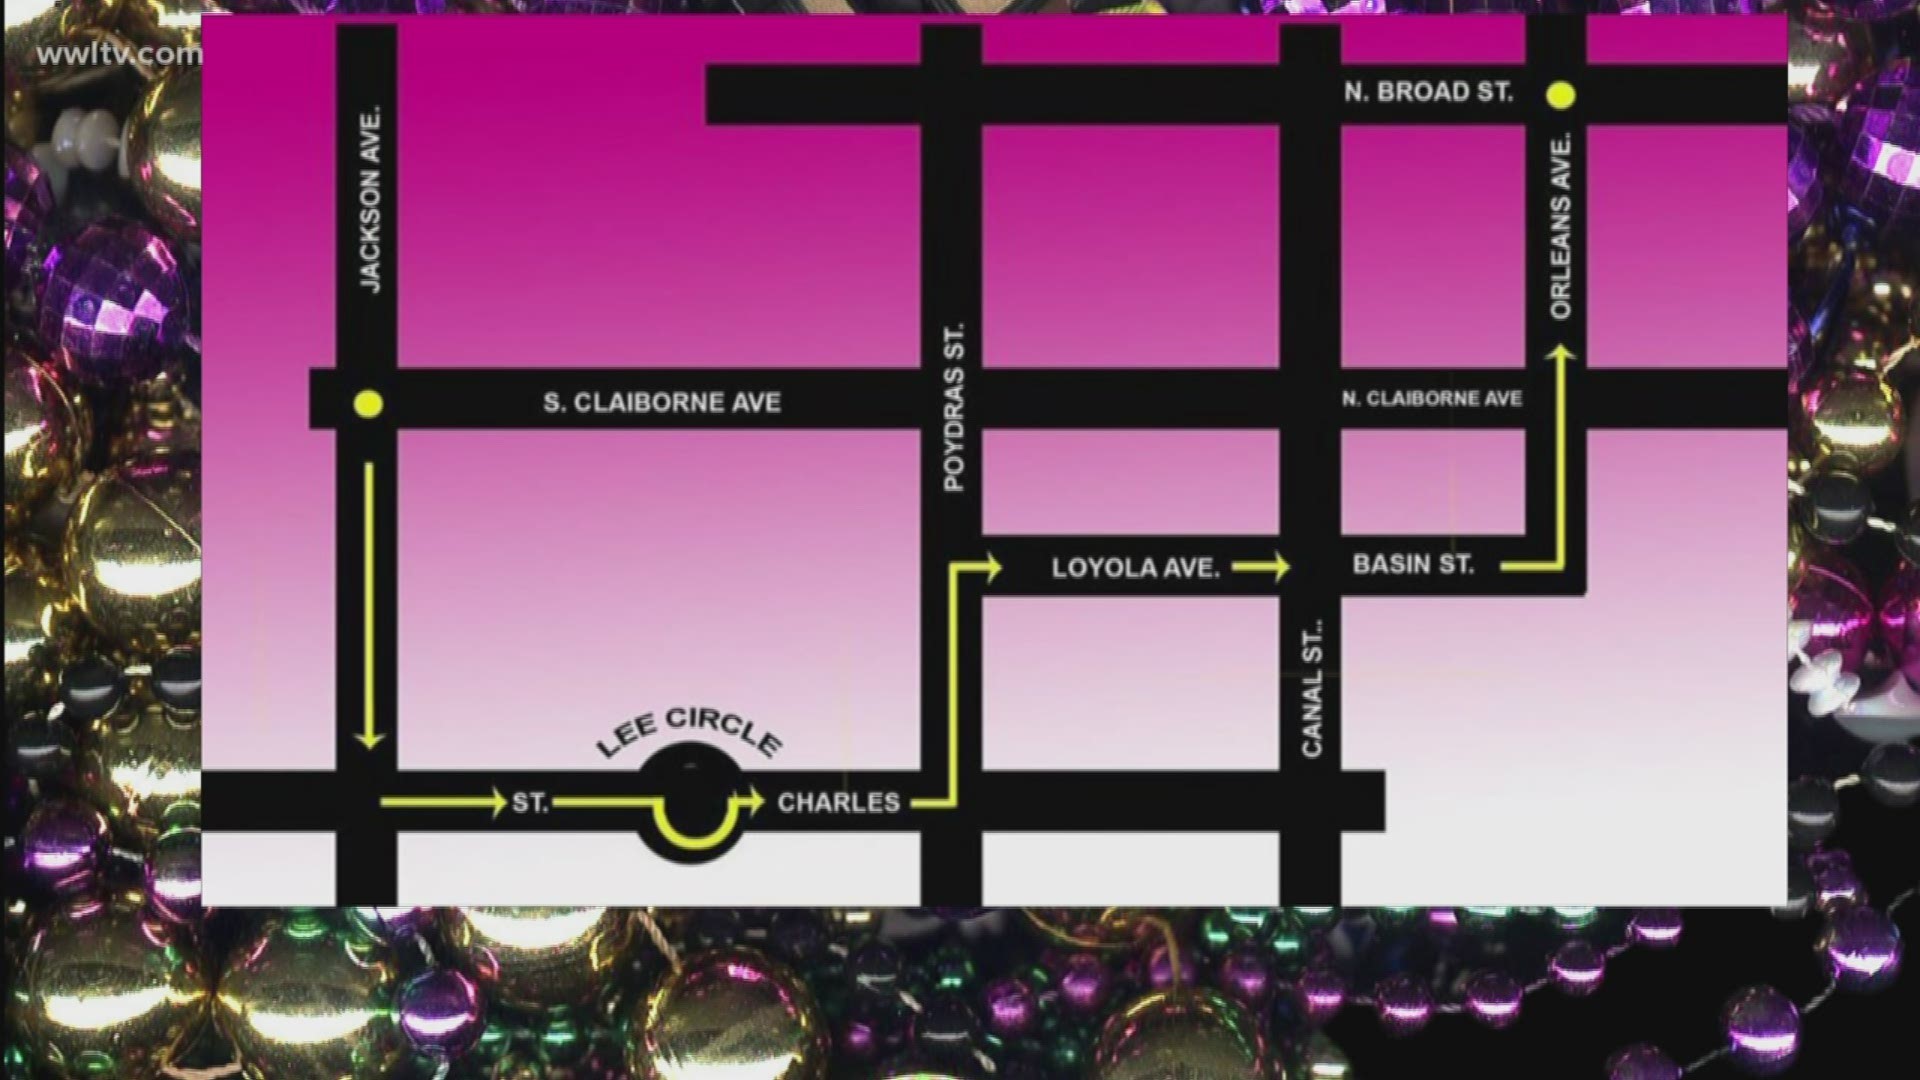 City officials tweeted Zulu's parade route for Mardi Gras, and it avoids the Hard Rock Hotel collapse site.